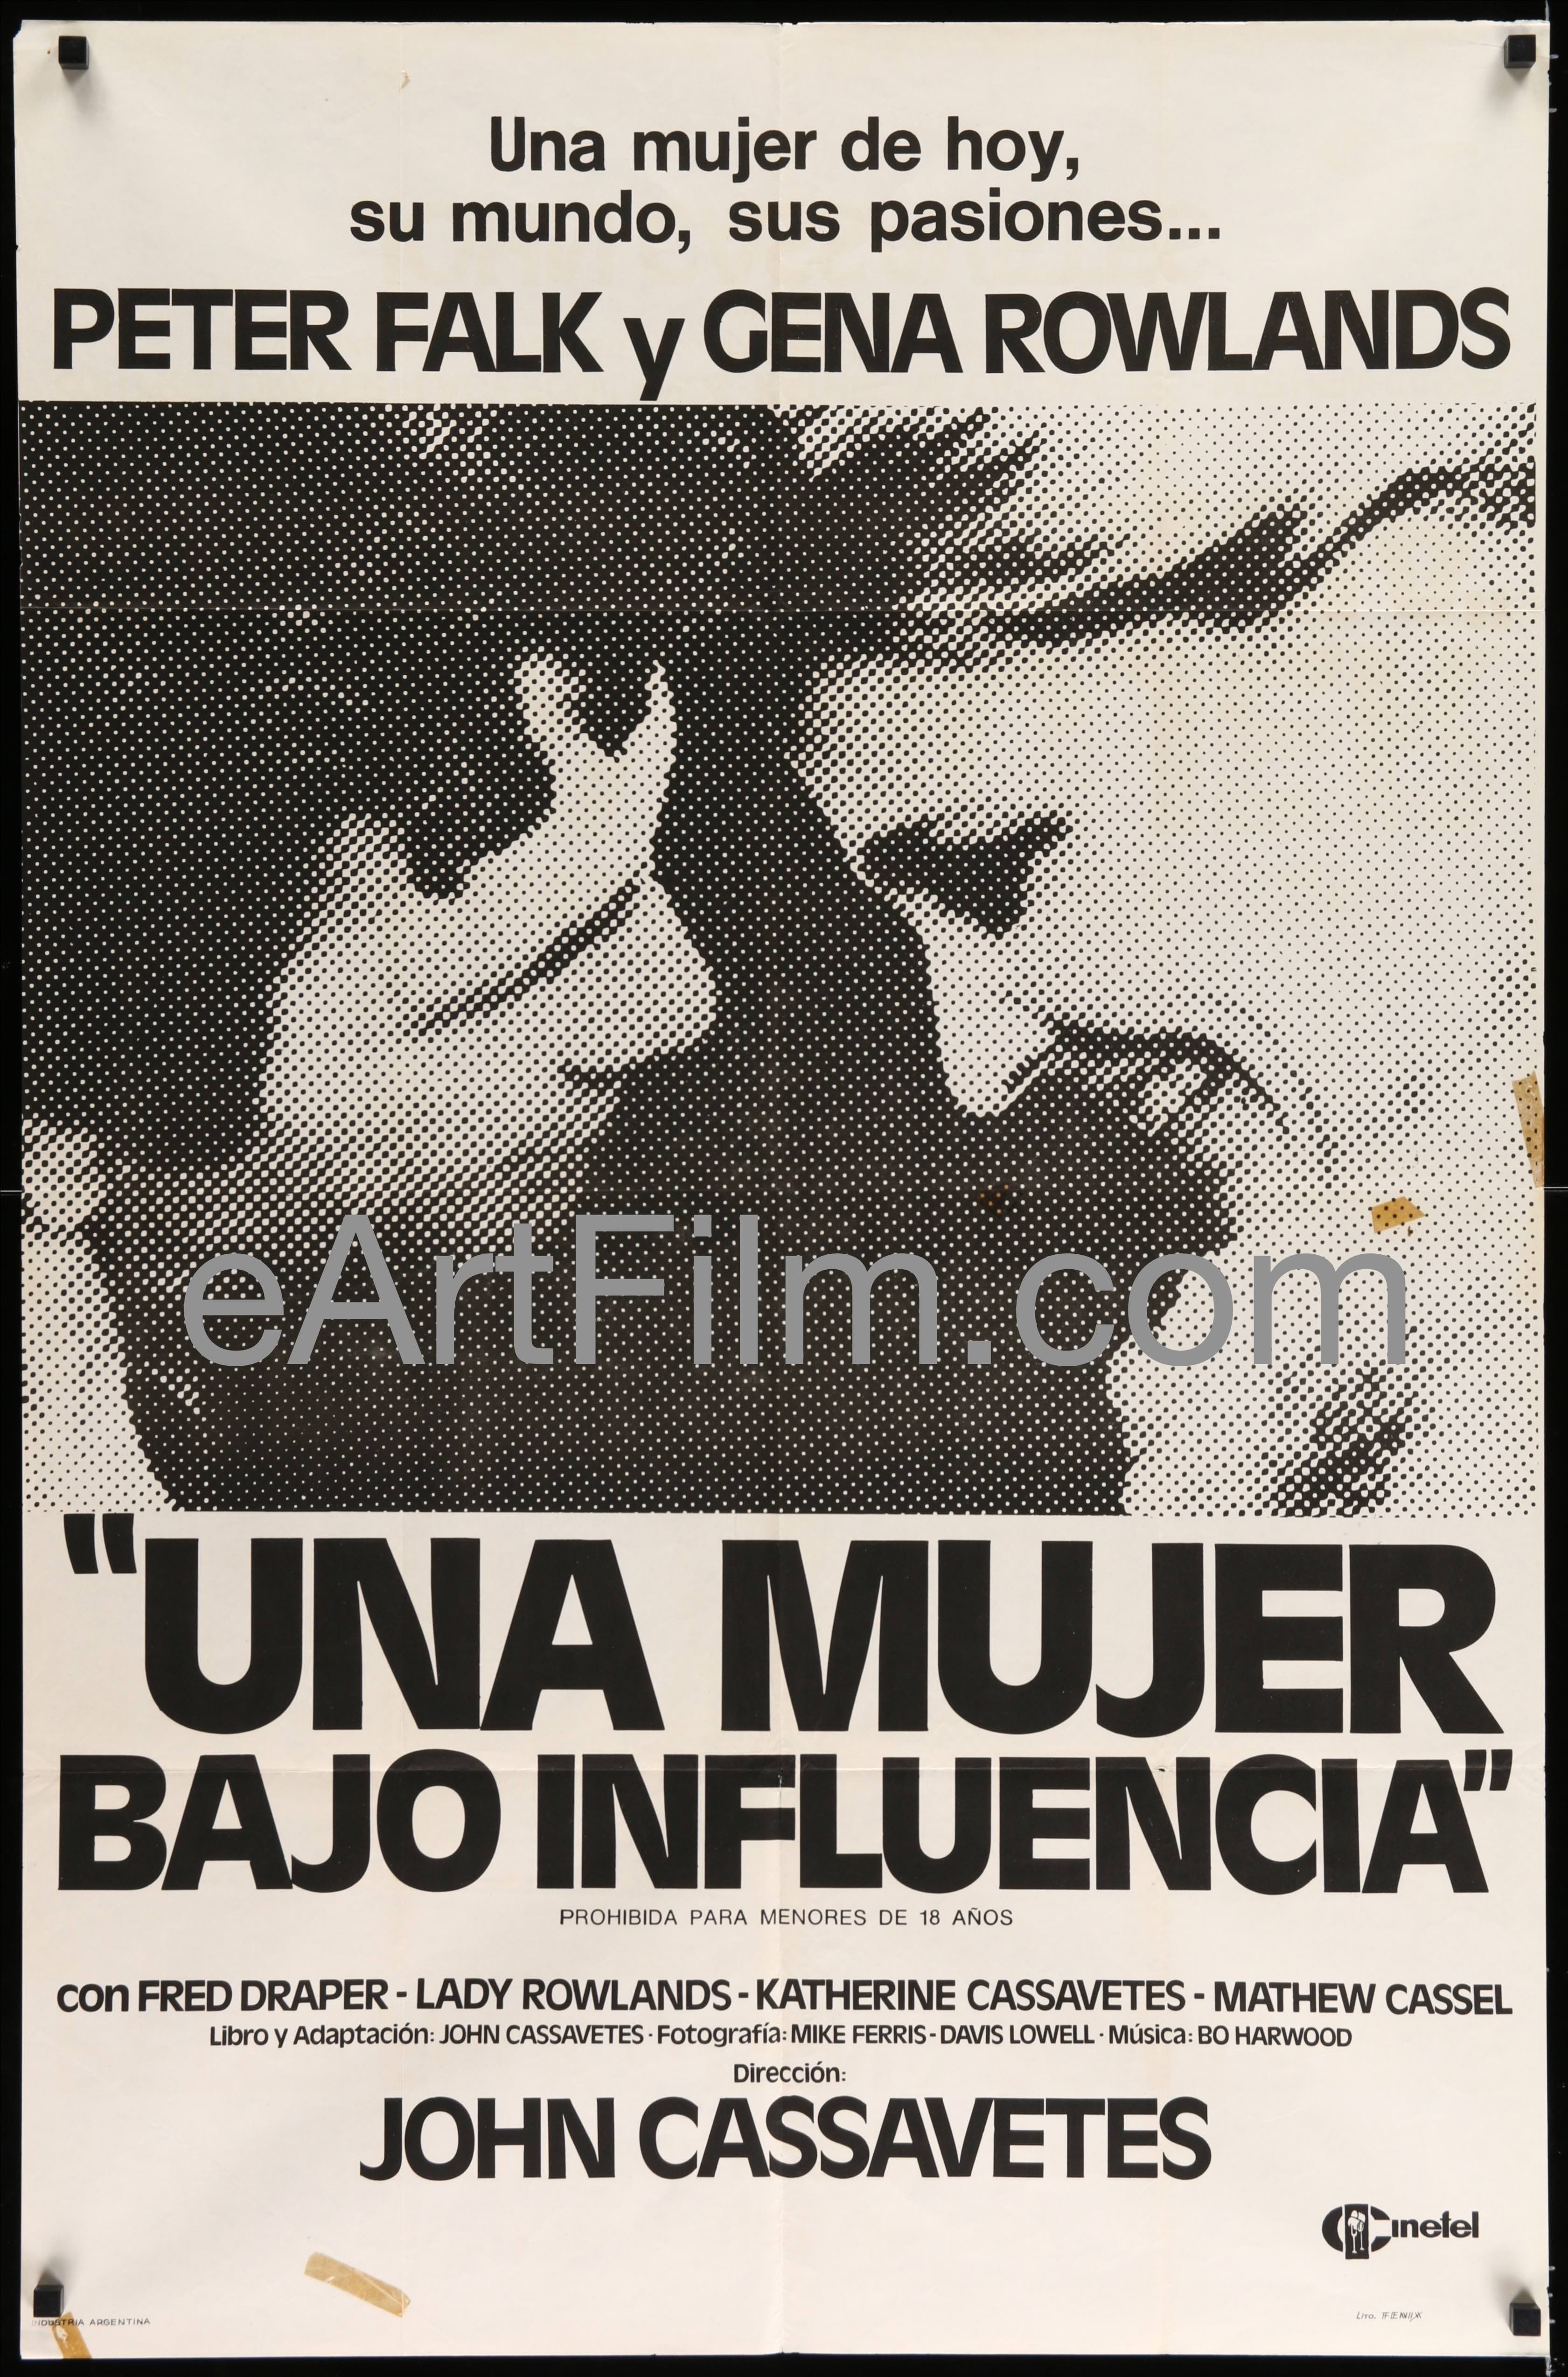 A Woman Under the Influence. 1974. Written and directed by John